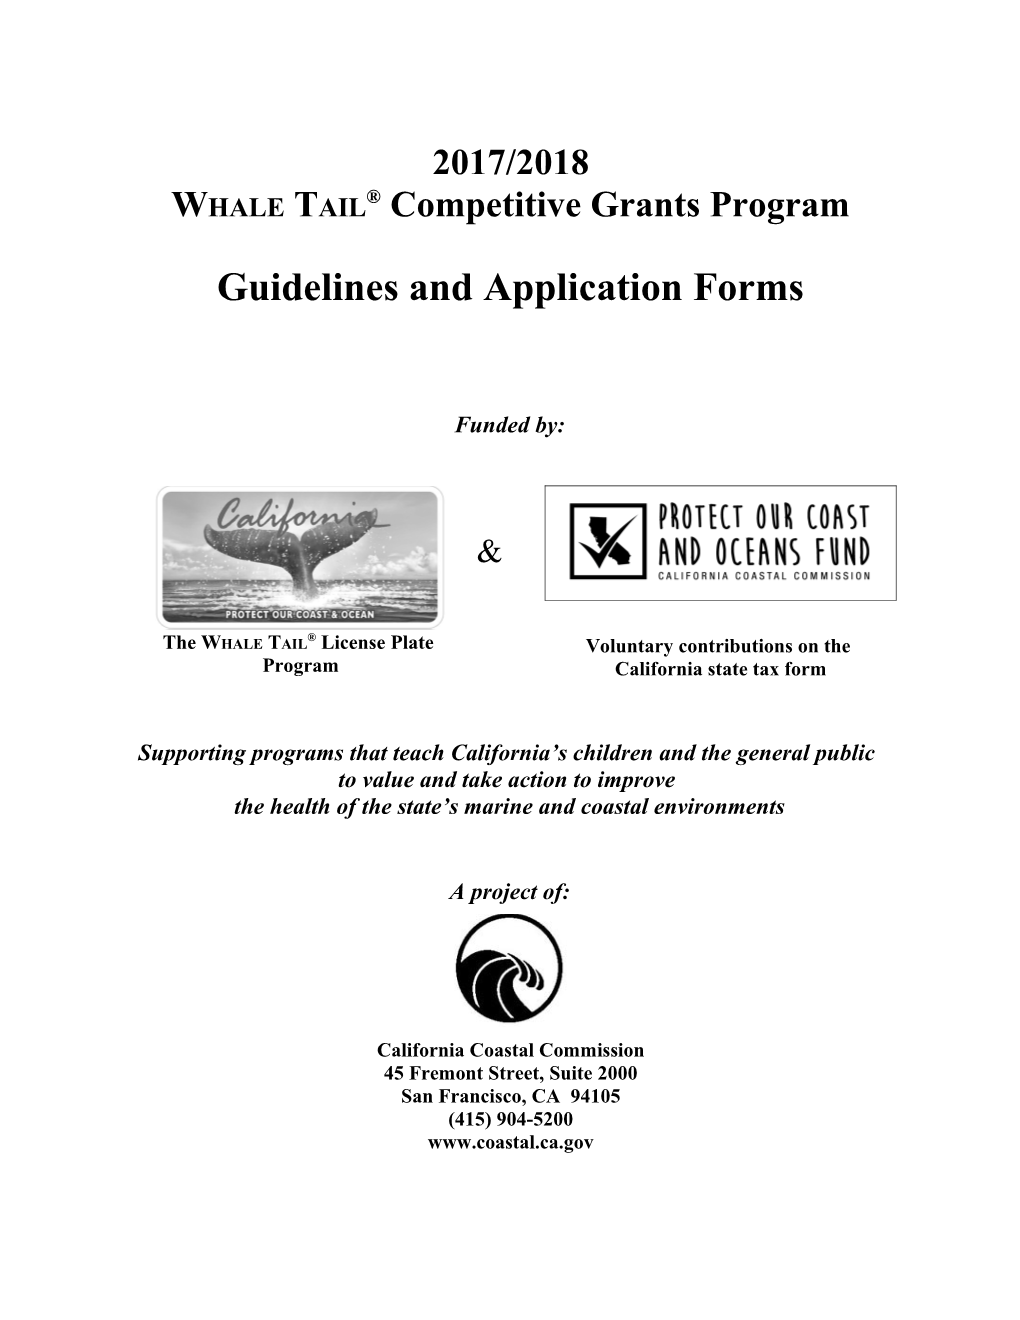 2014/15 Whale Tail Grant Guidelines